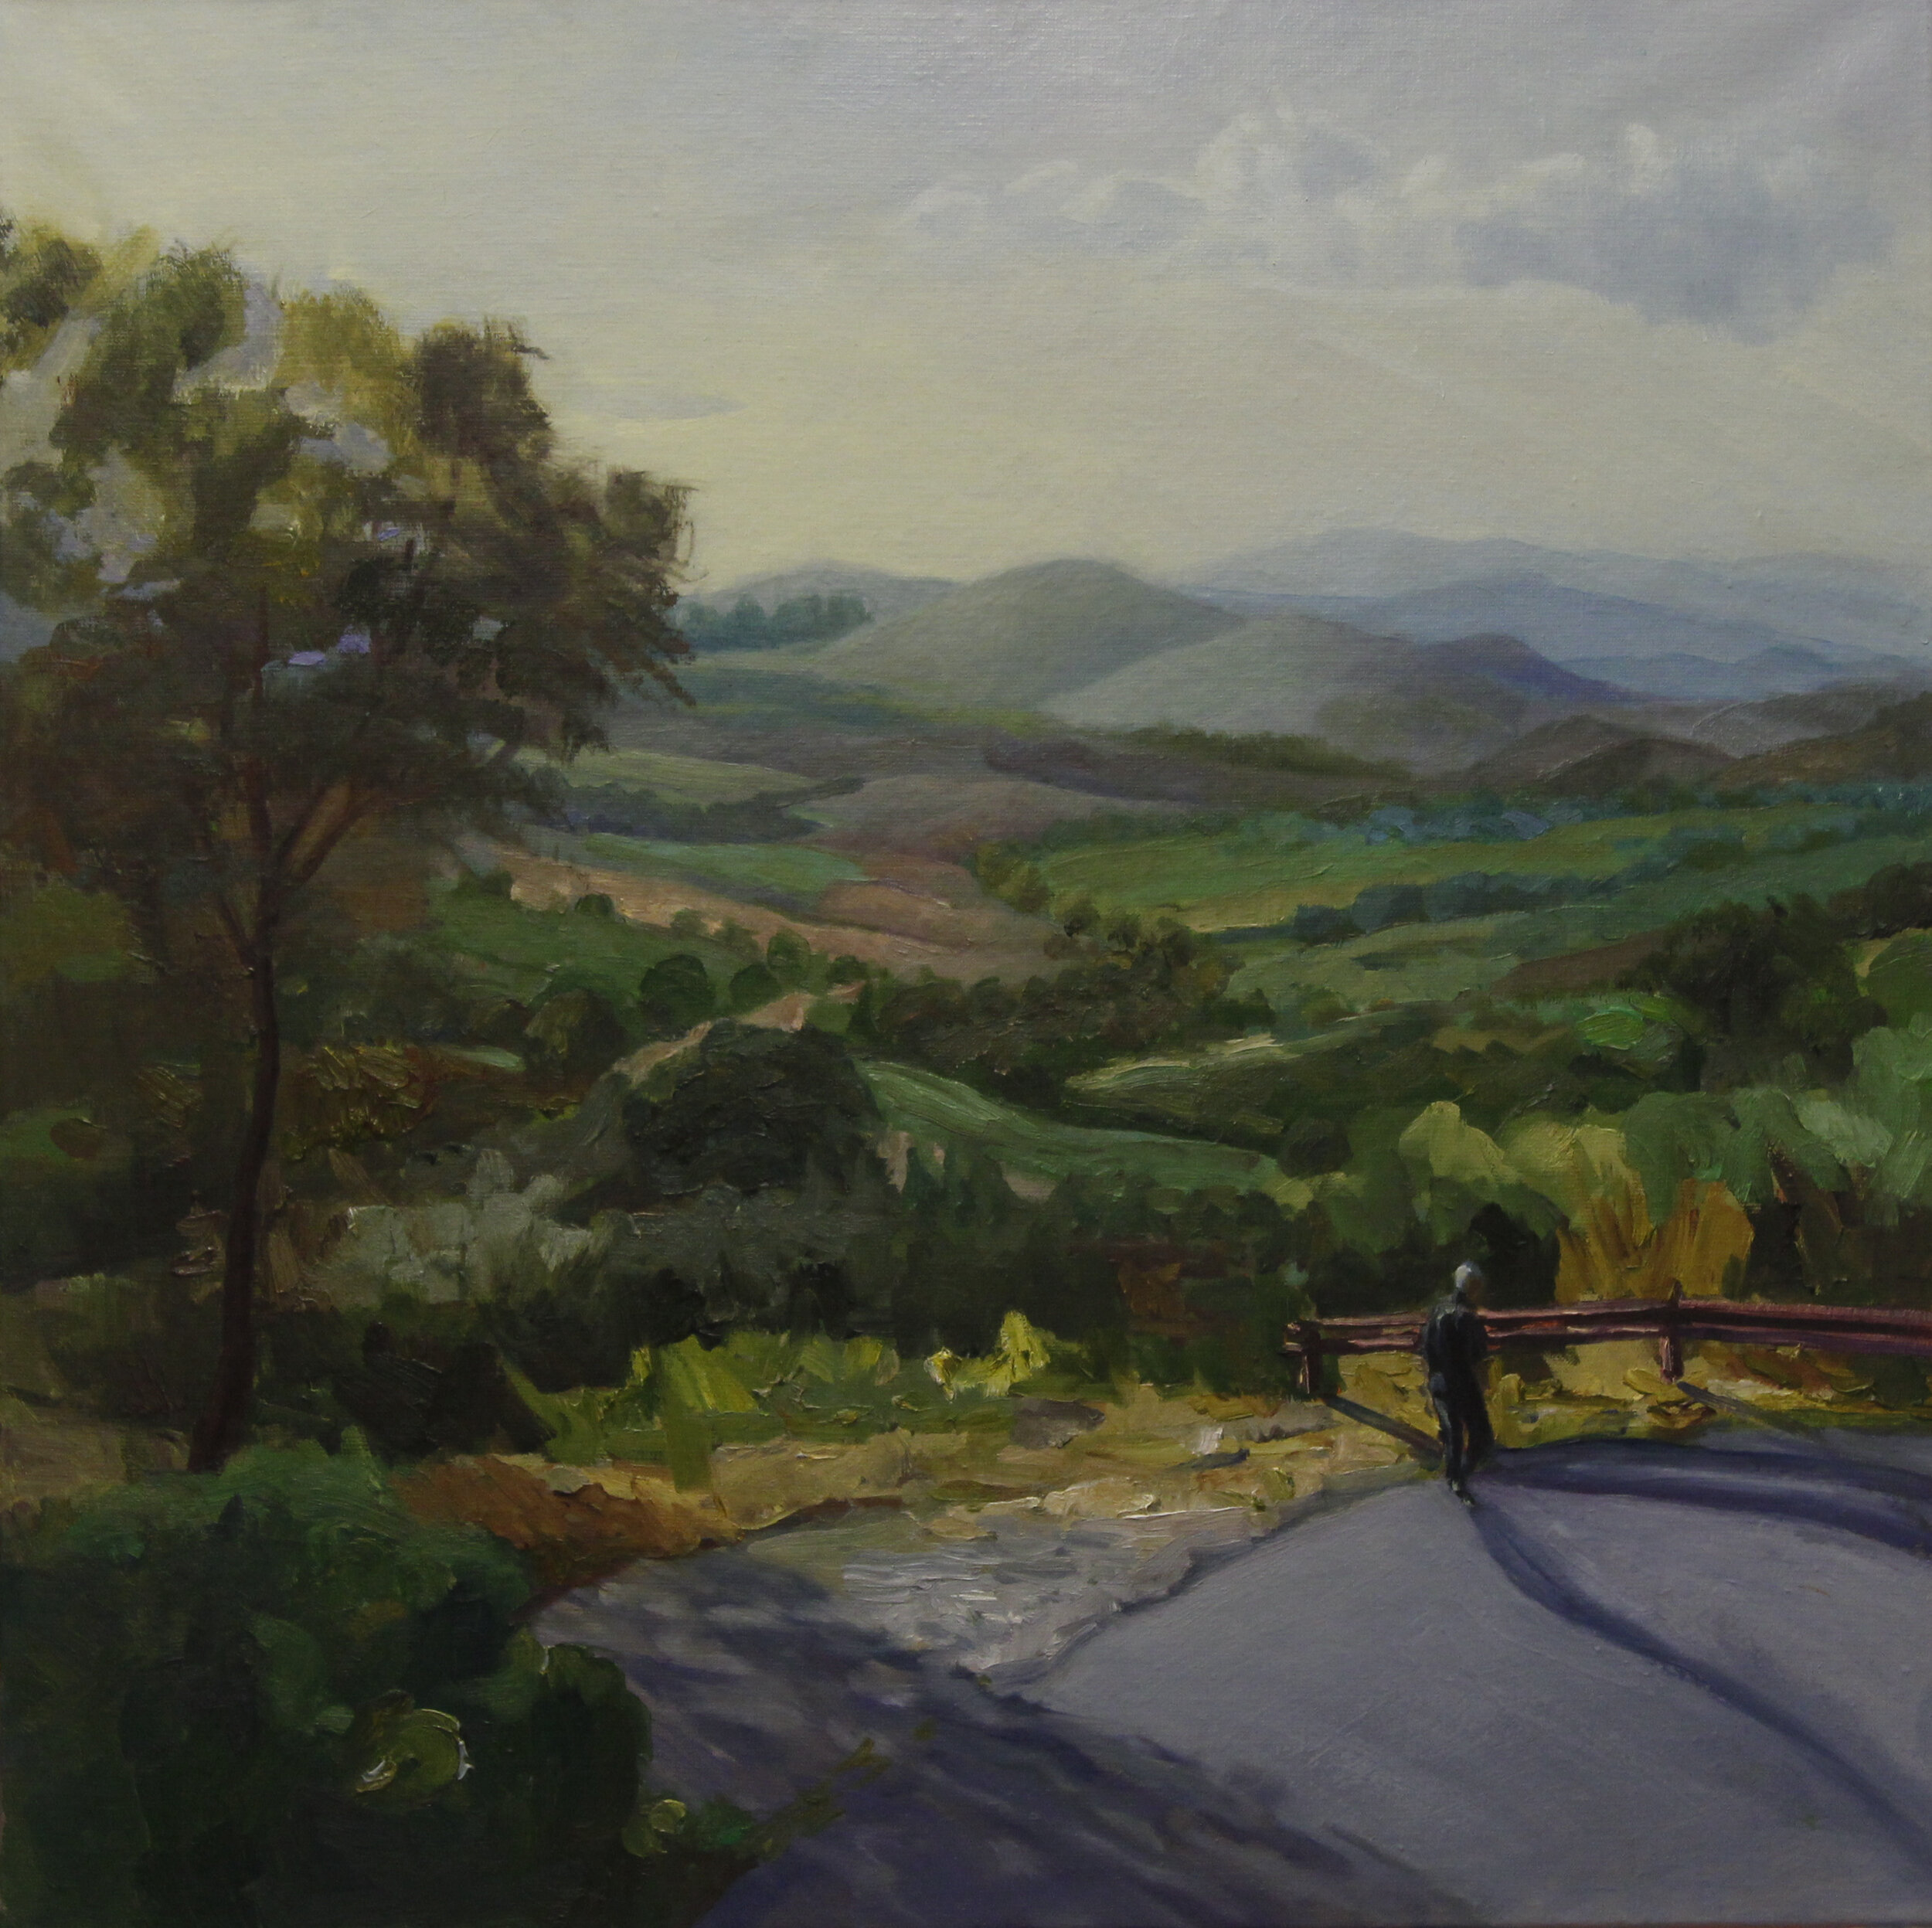 Montepulciano d'Abruzzo, Italy. 2018, oil on linen, 30 x 30 in. Private collection.